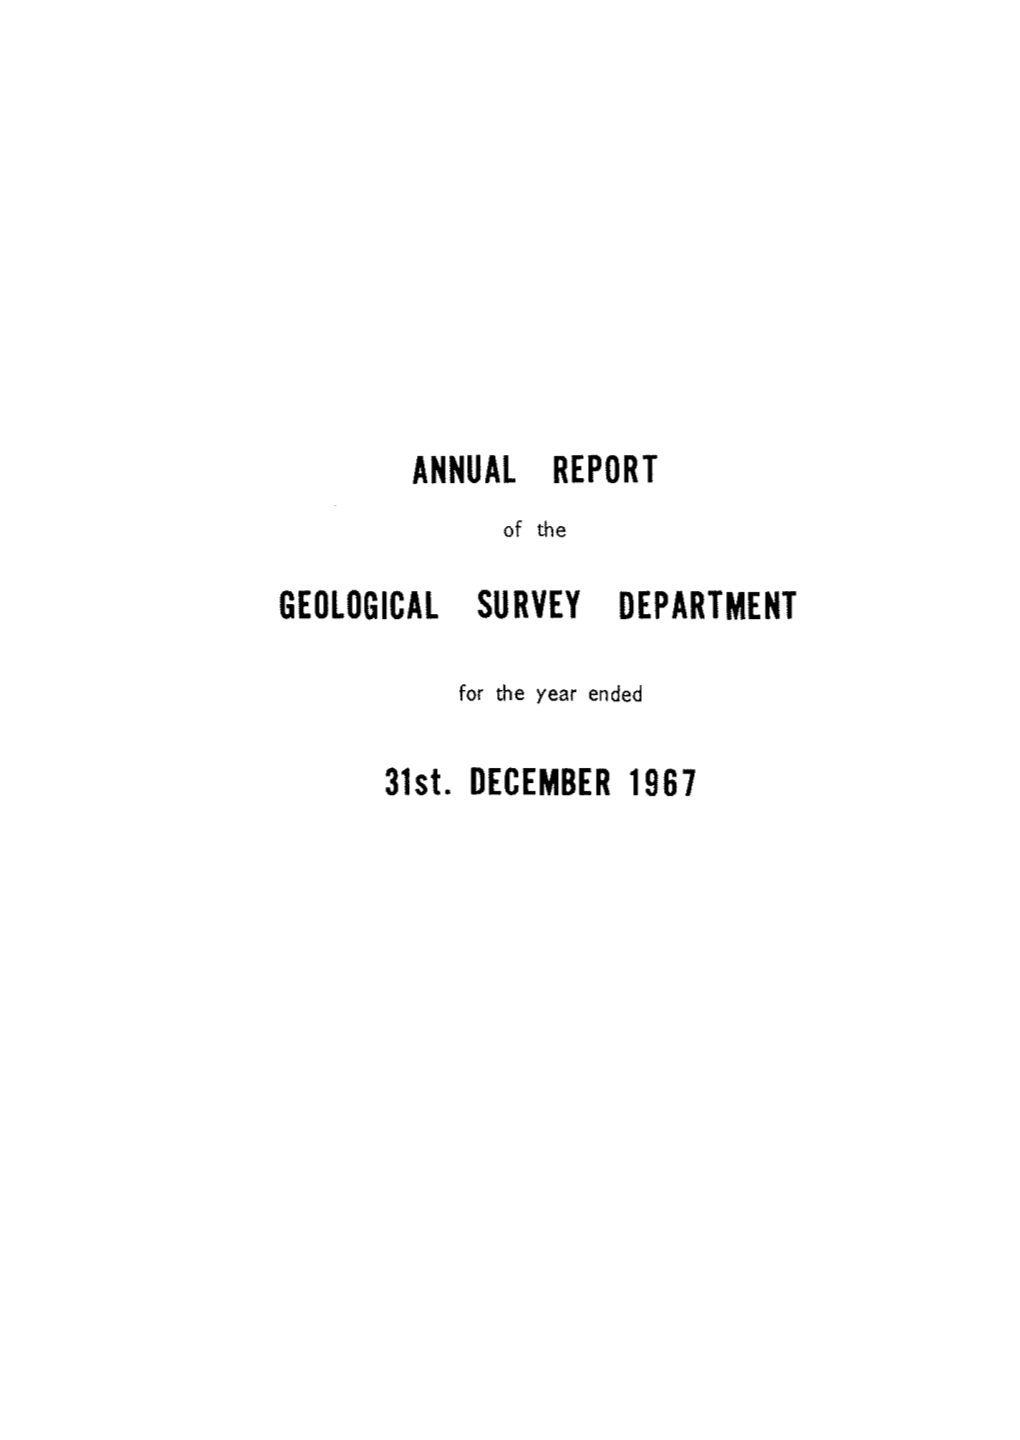 ANNUAL REPORT GEOLOGICAL SURVEY DEPARTMENT 31St